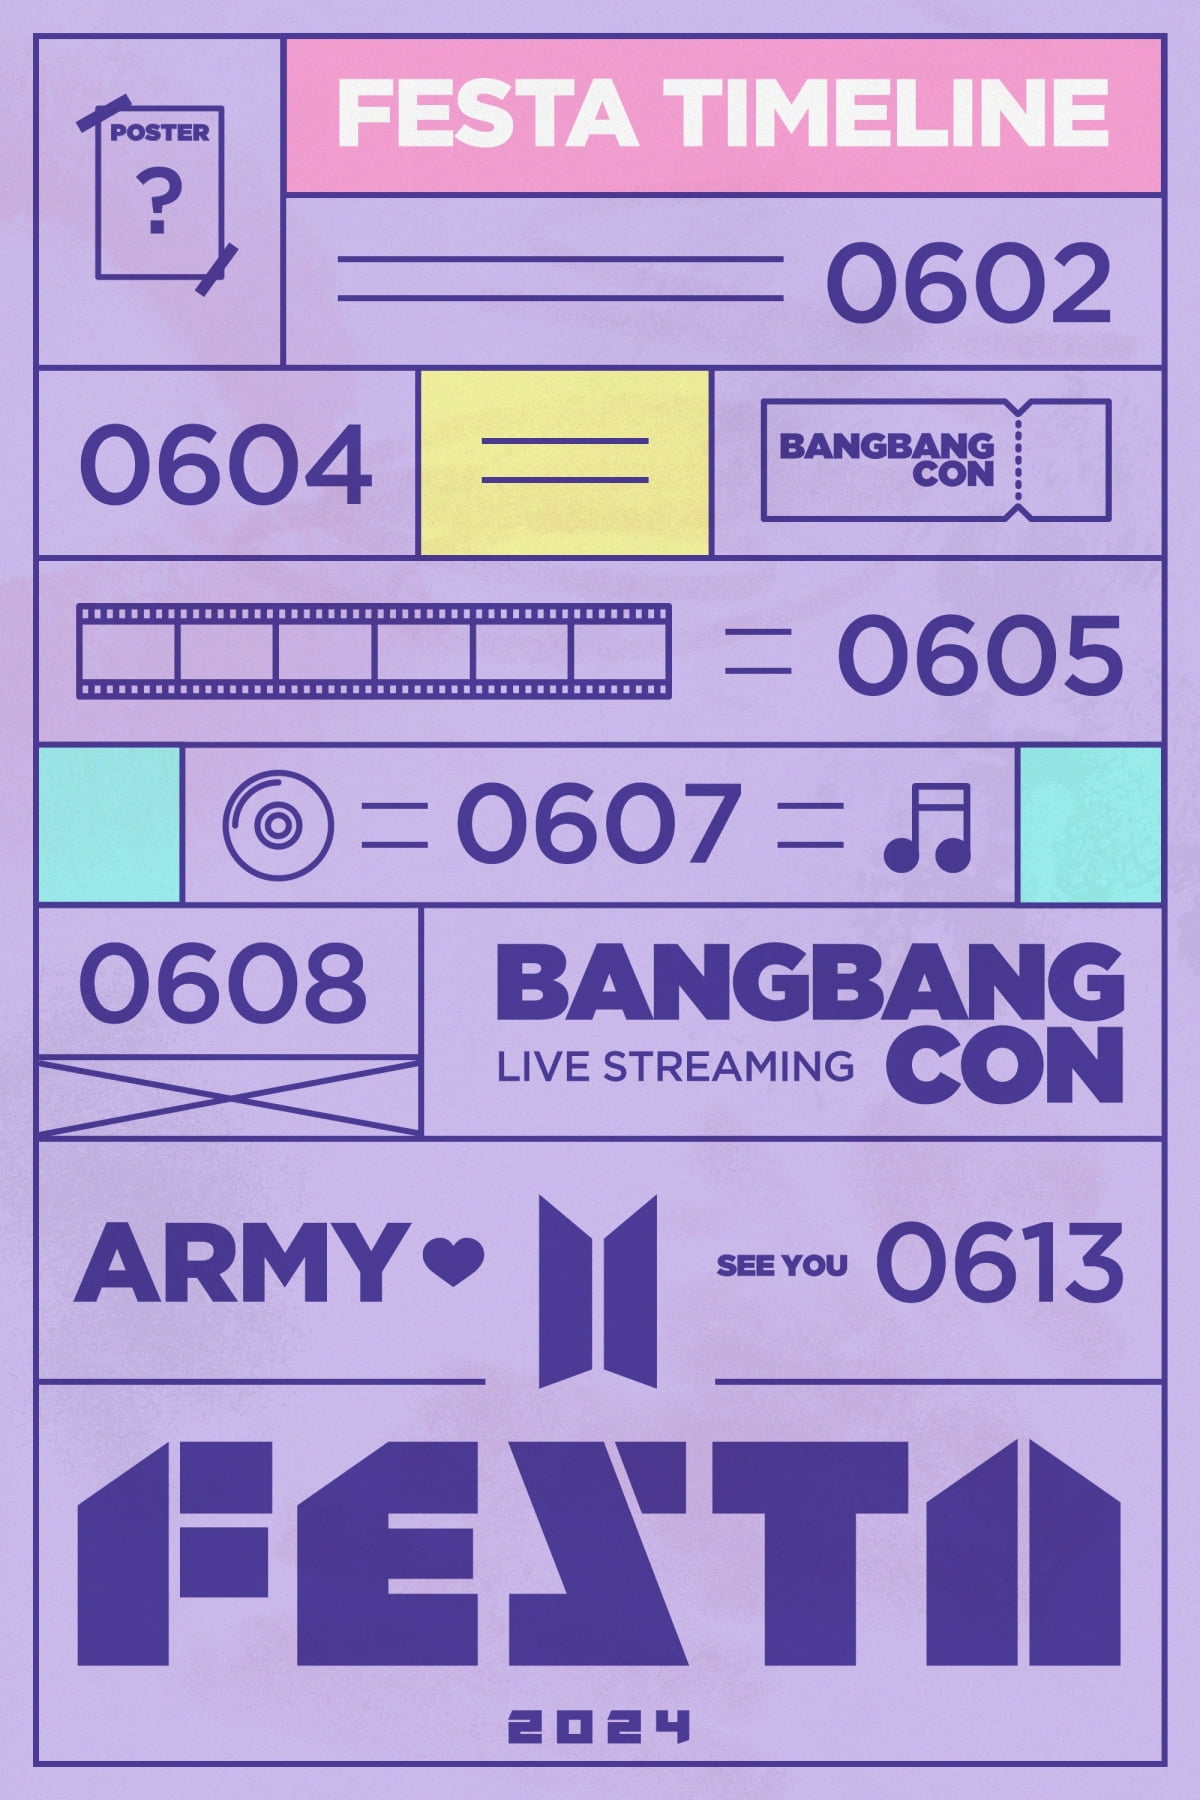 BTS and ARMY’s festival is back